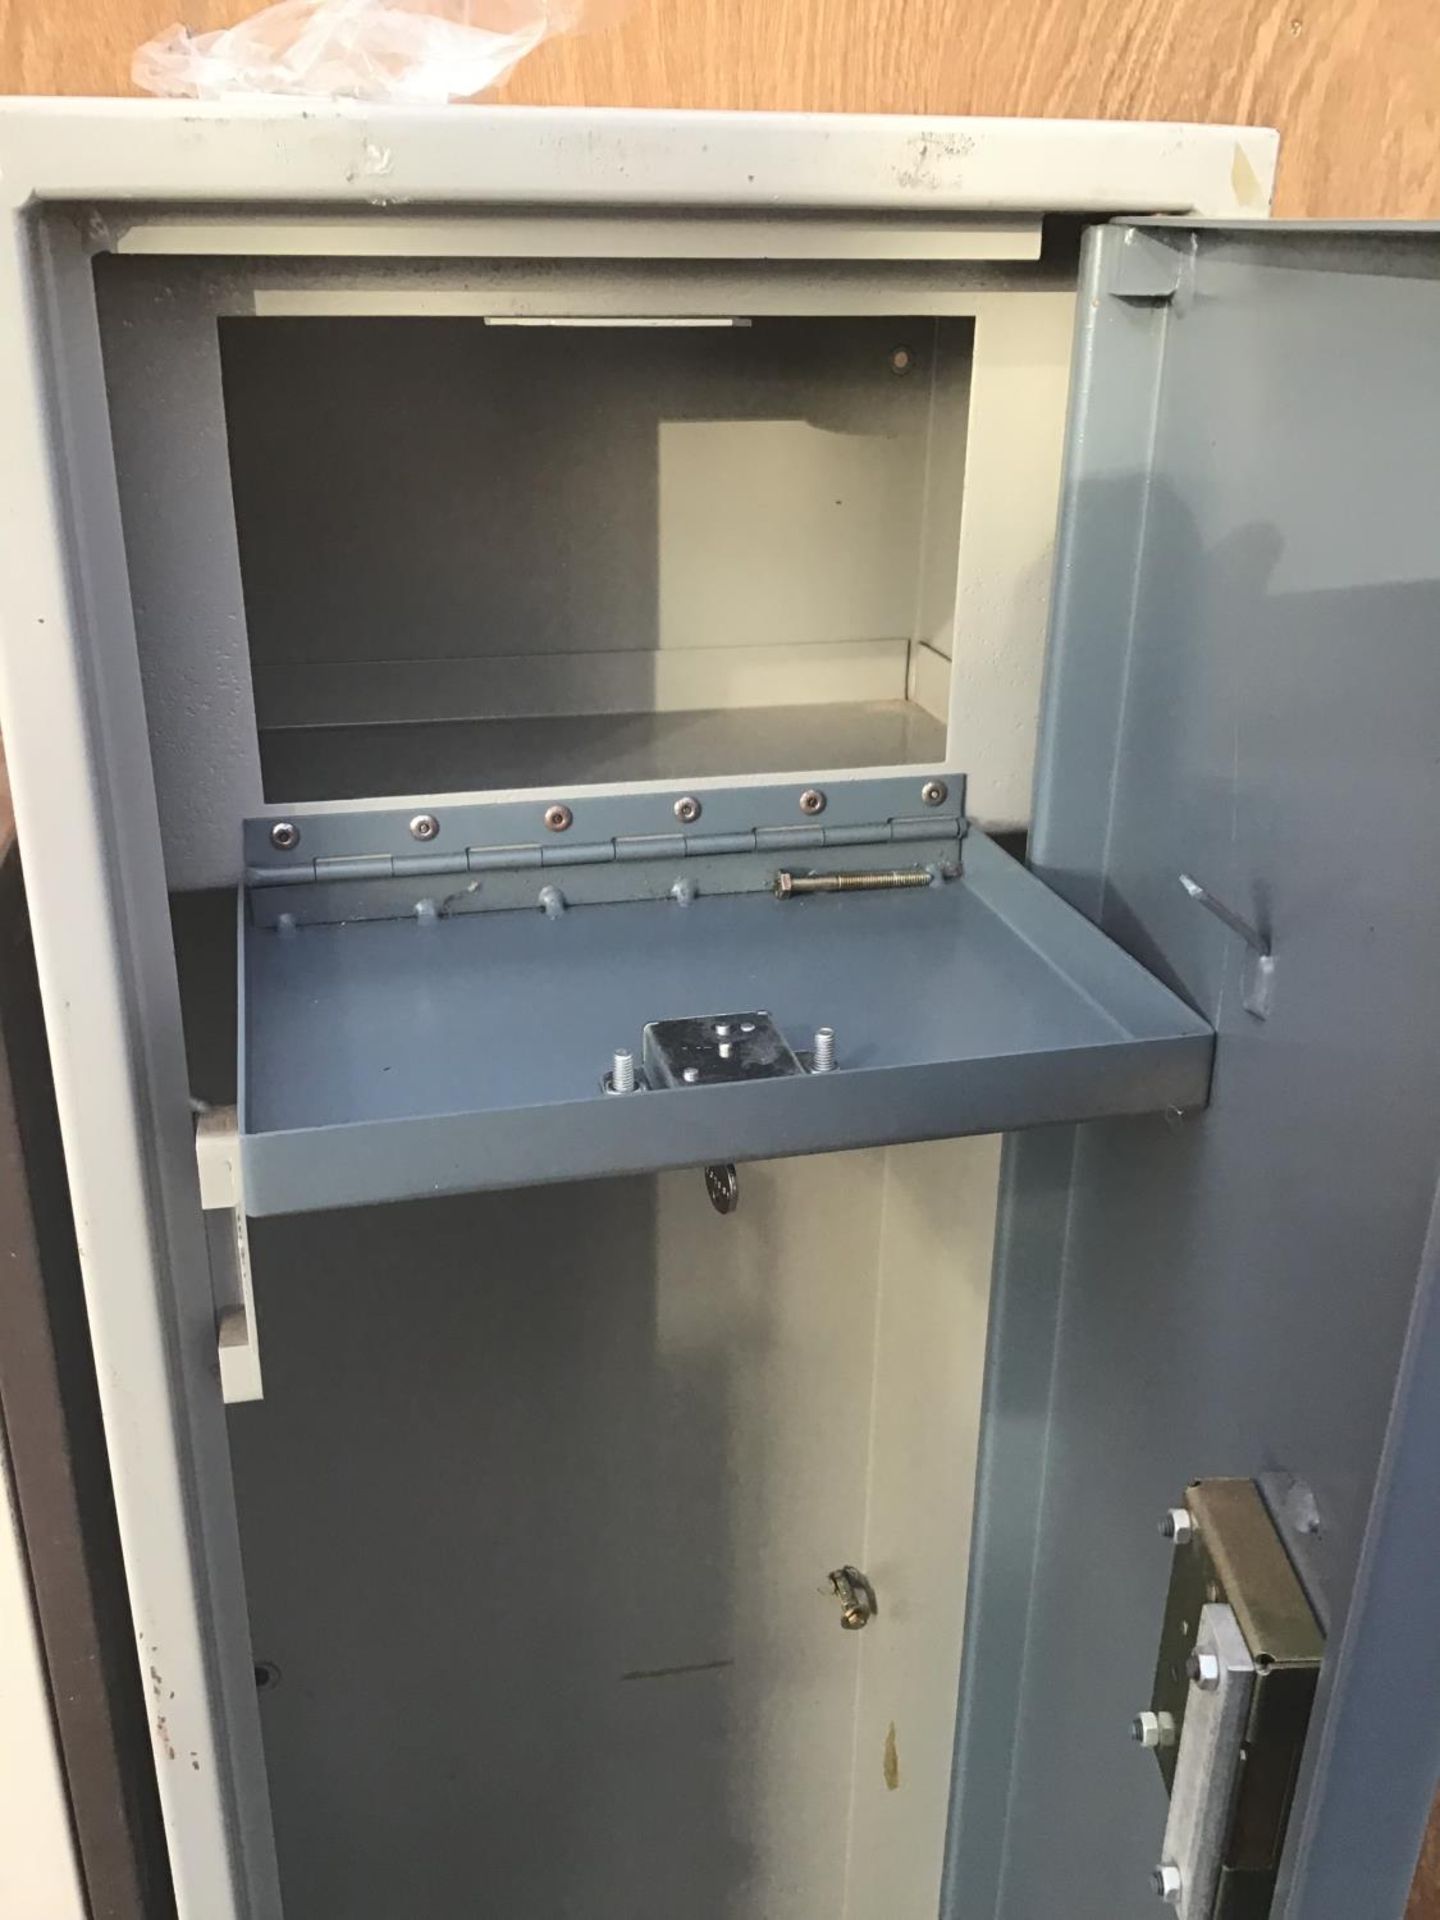 TWO GUN CABINETS BOTH WITH KEYS, ONE WITH INTERIOR LOCKING BOX - Image 2 of 5